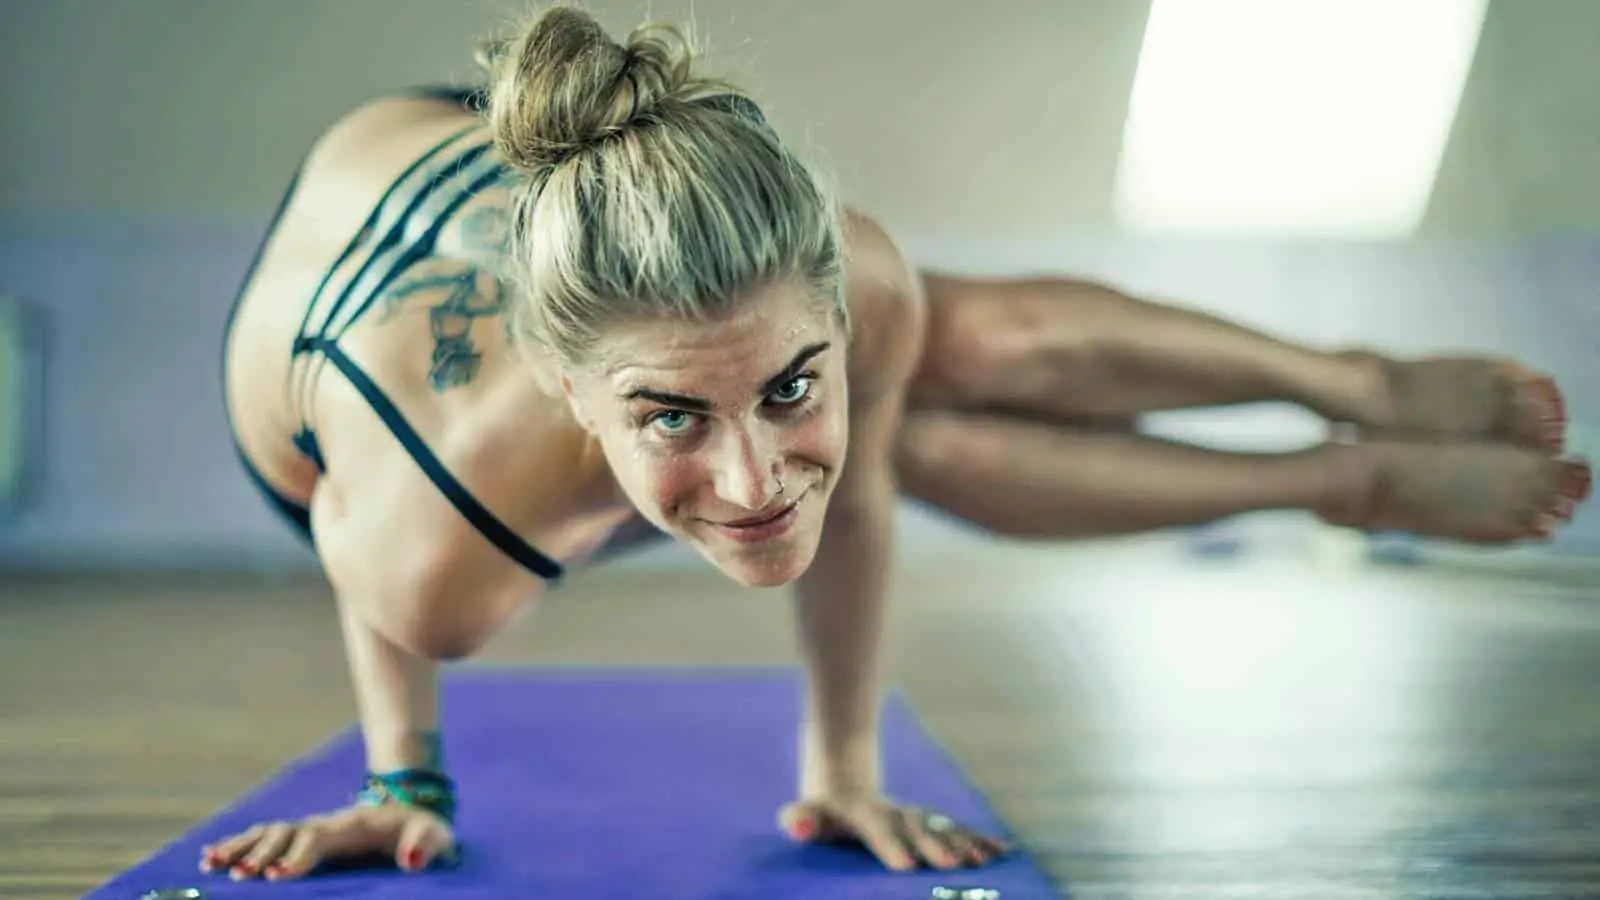 can you do hot yoga everyday?